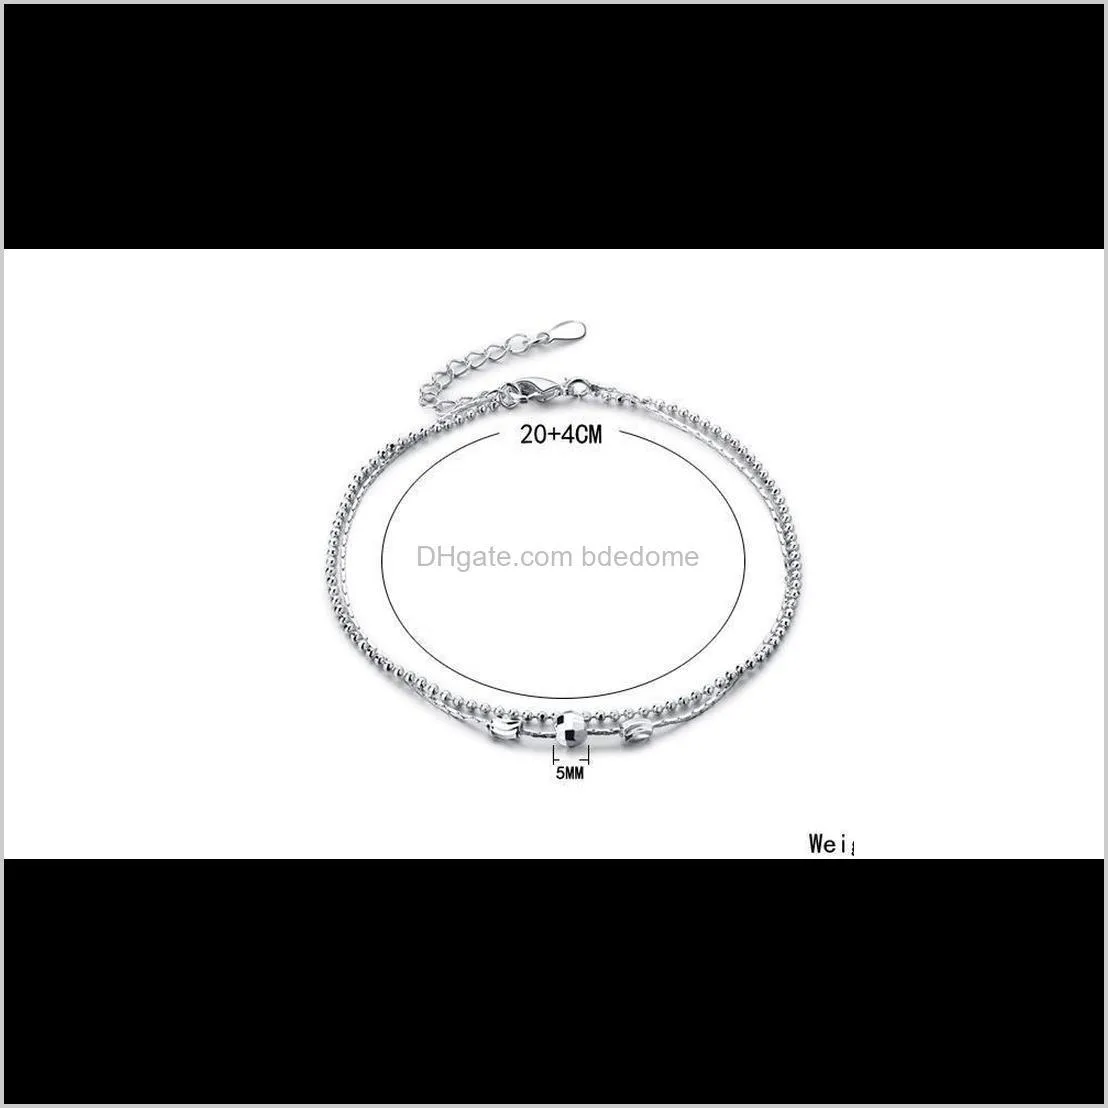 Sexy ankle bracelets beach jewelry 2017 new 925 Sterling silver Double layers anklets jewelry for Women Boot Foot Free ship